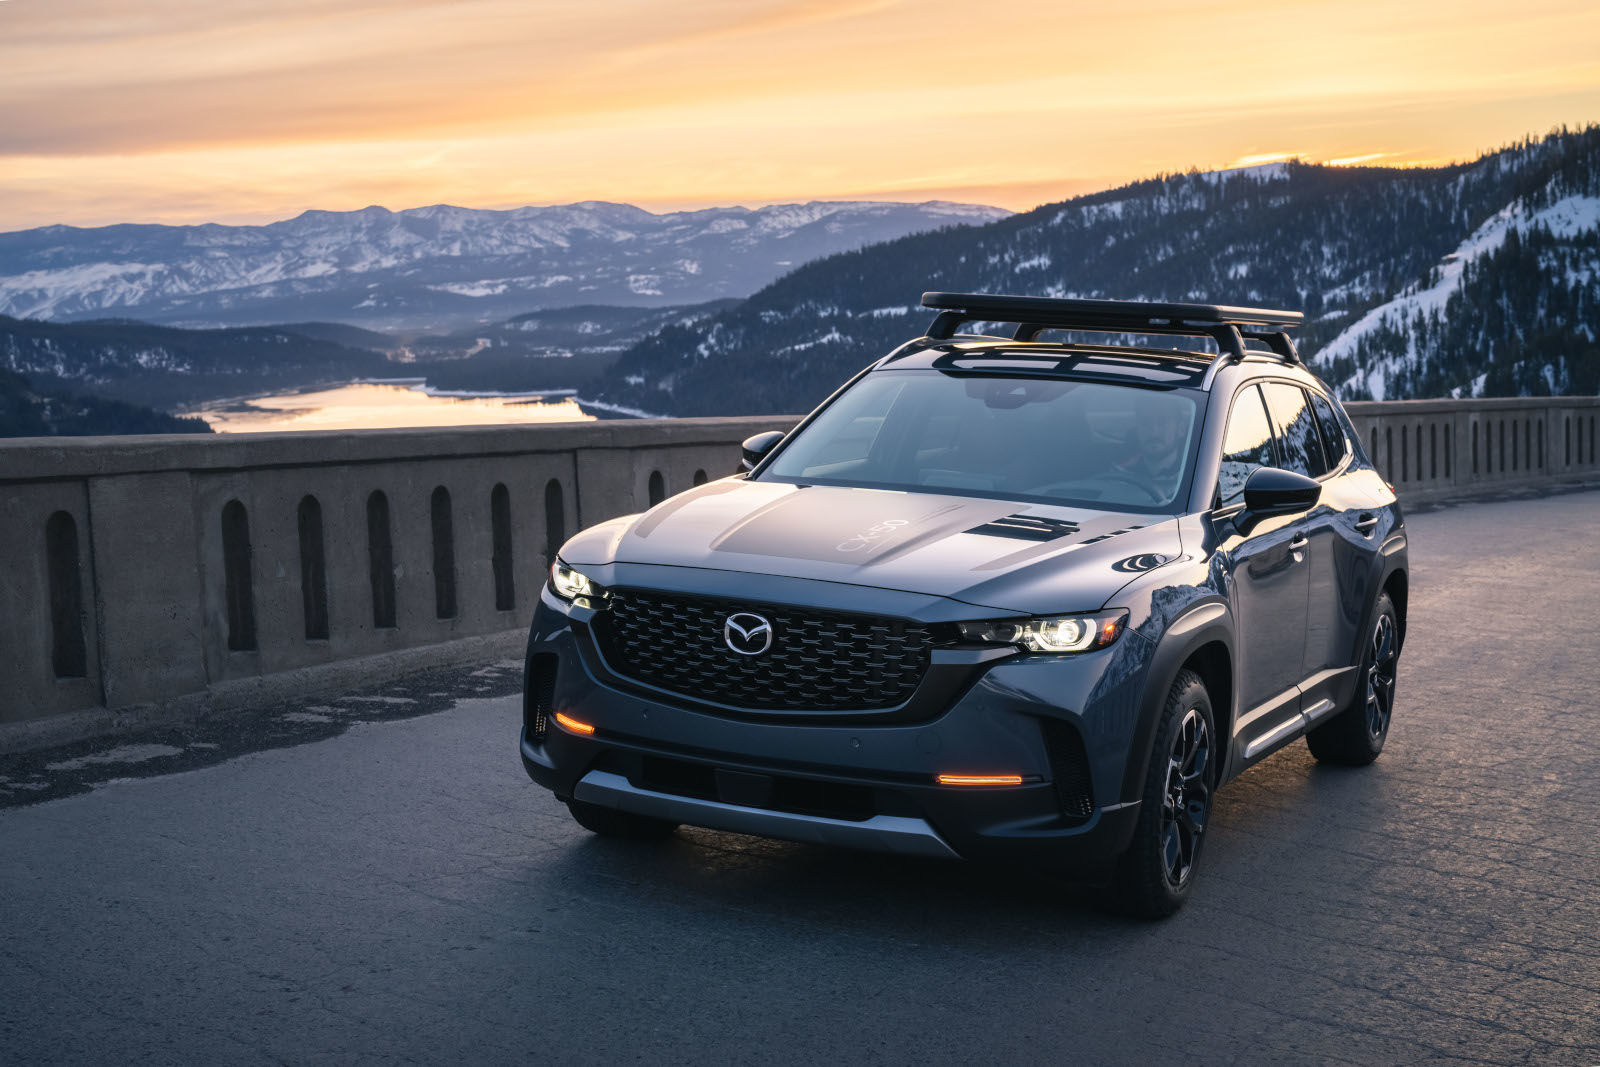 The Ultimate Guide to Towing Capacity of 2023 Mazda SUVs: CX-5, CX-50, and CX-9